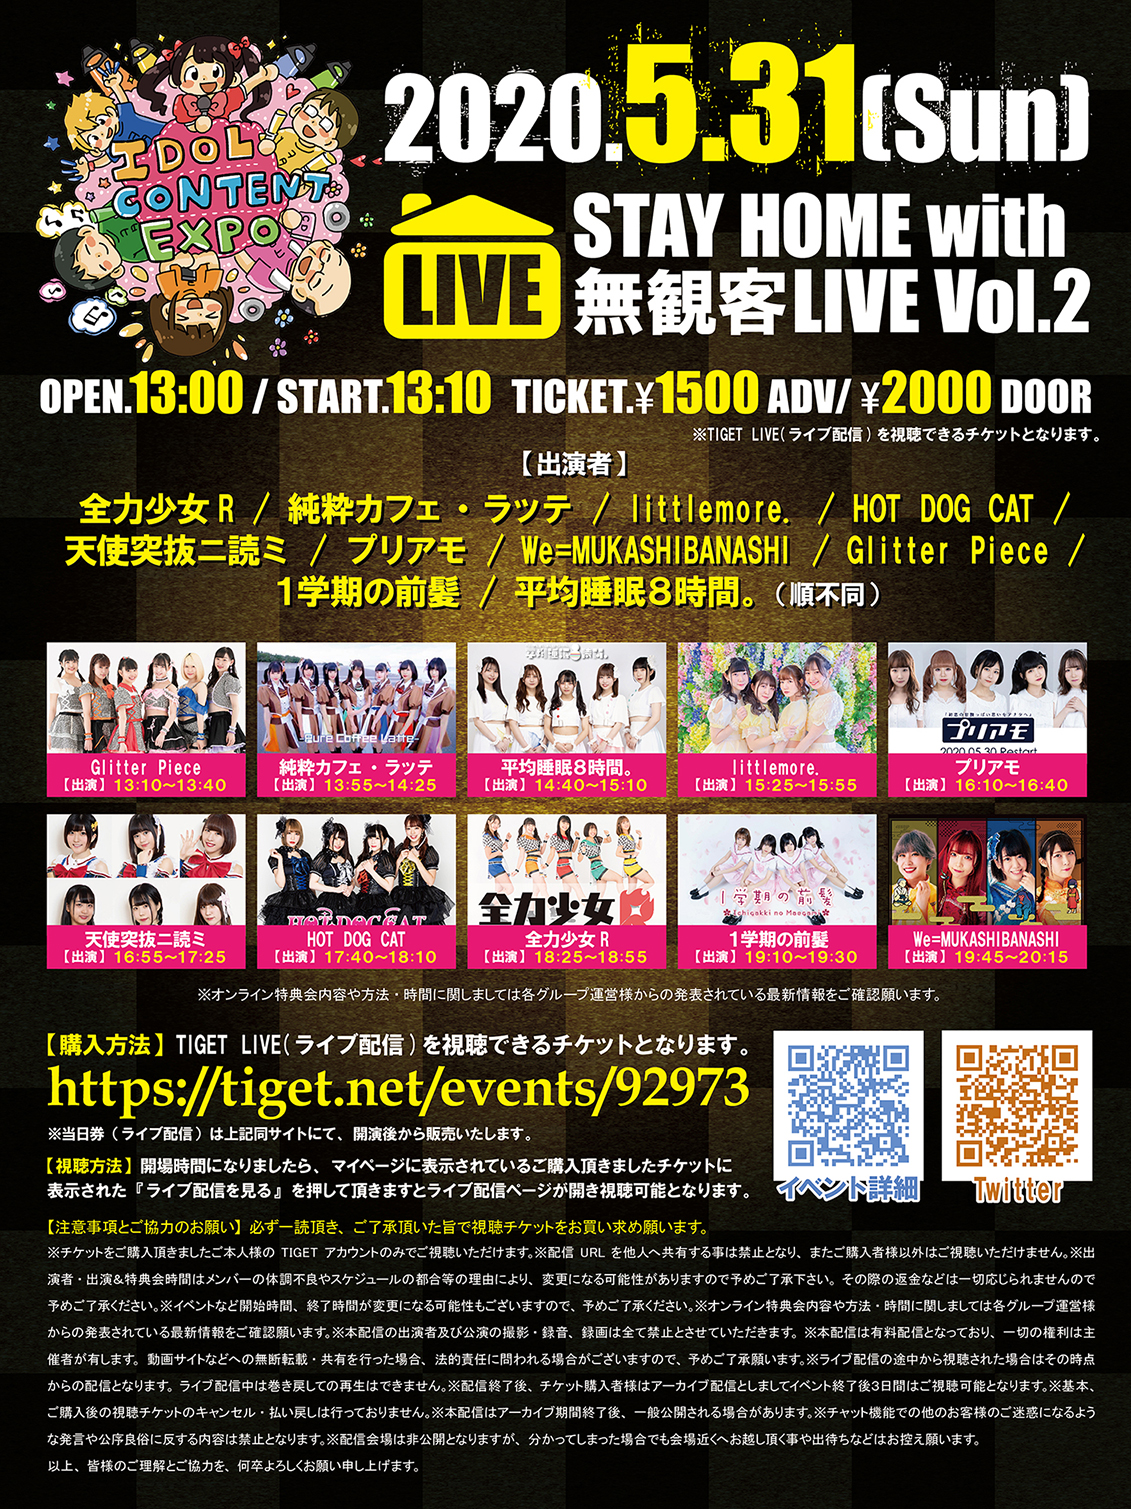 IDOL CONTENT EXPO ～ STAY HOME with 無観客LIVE Vol.2～